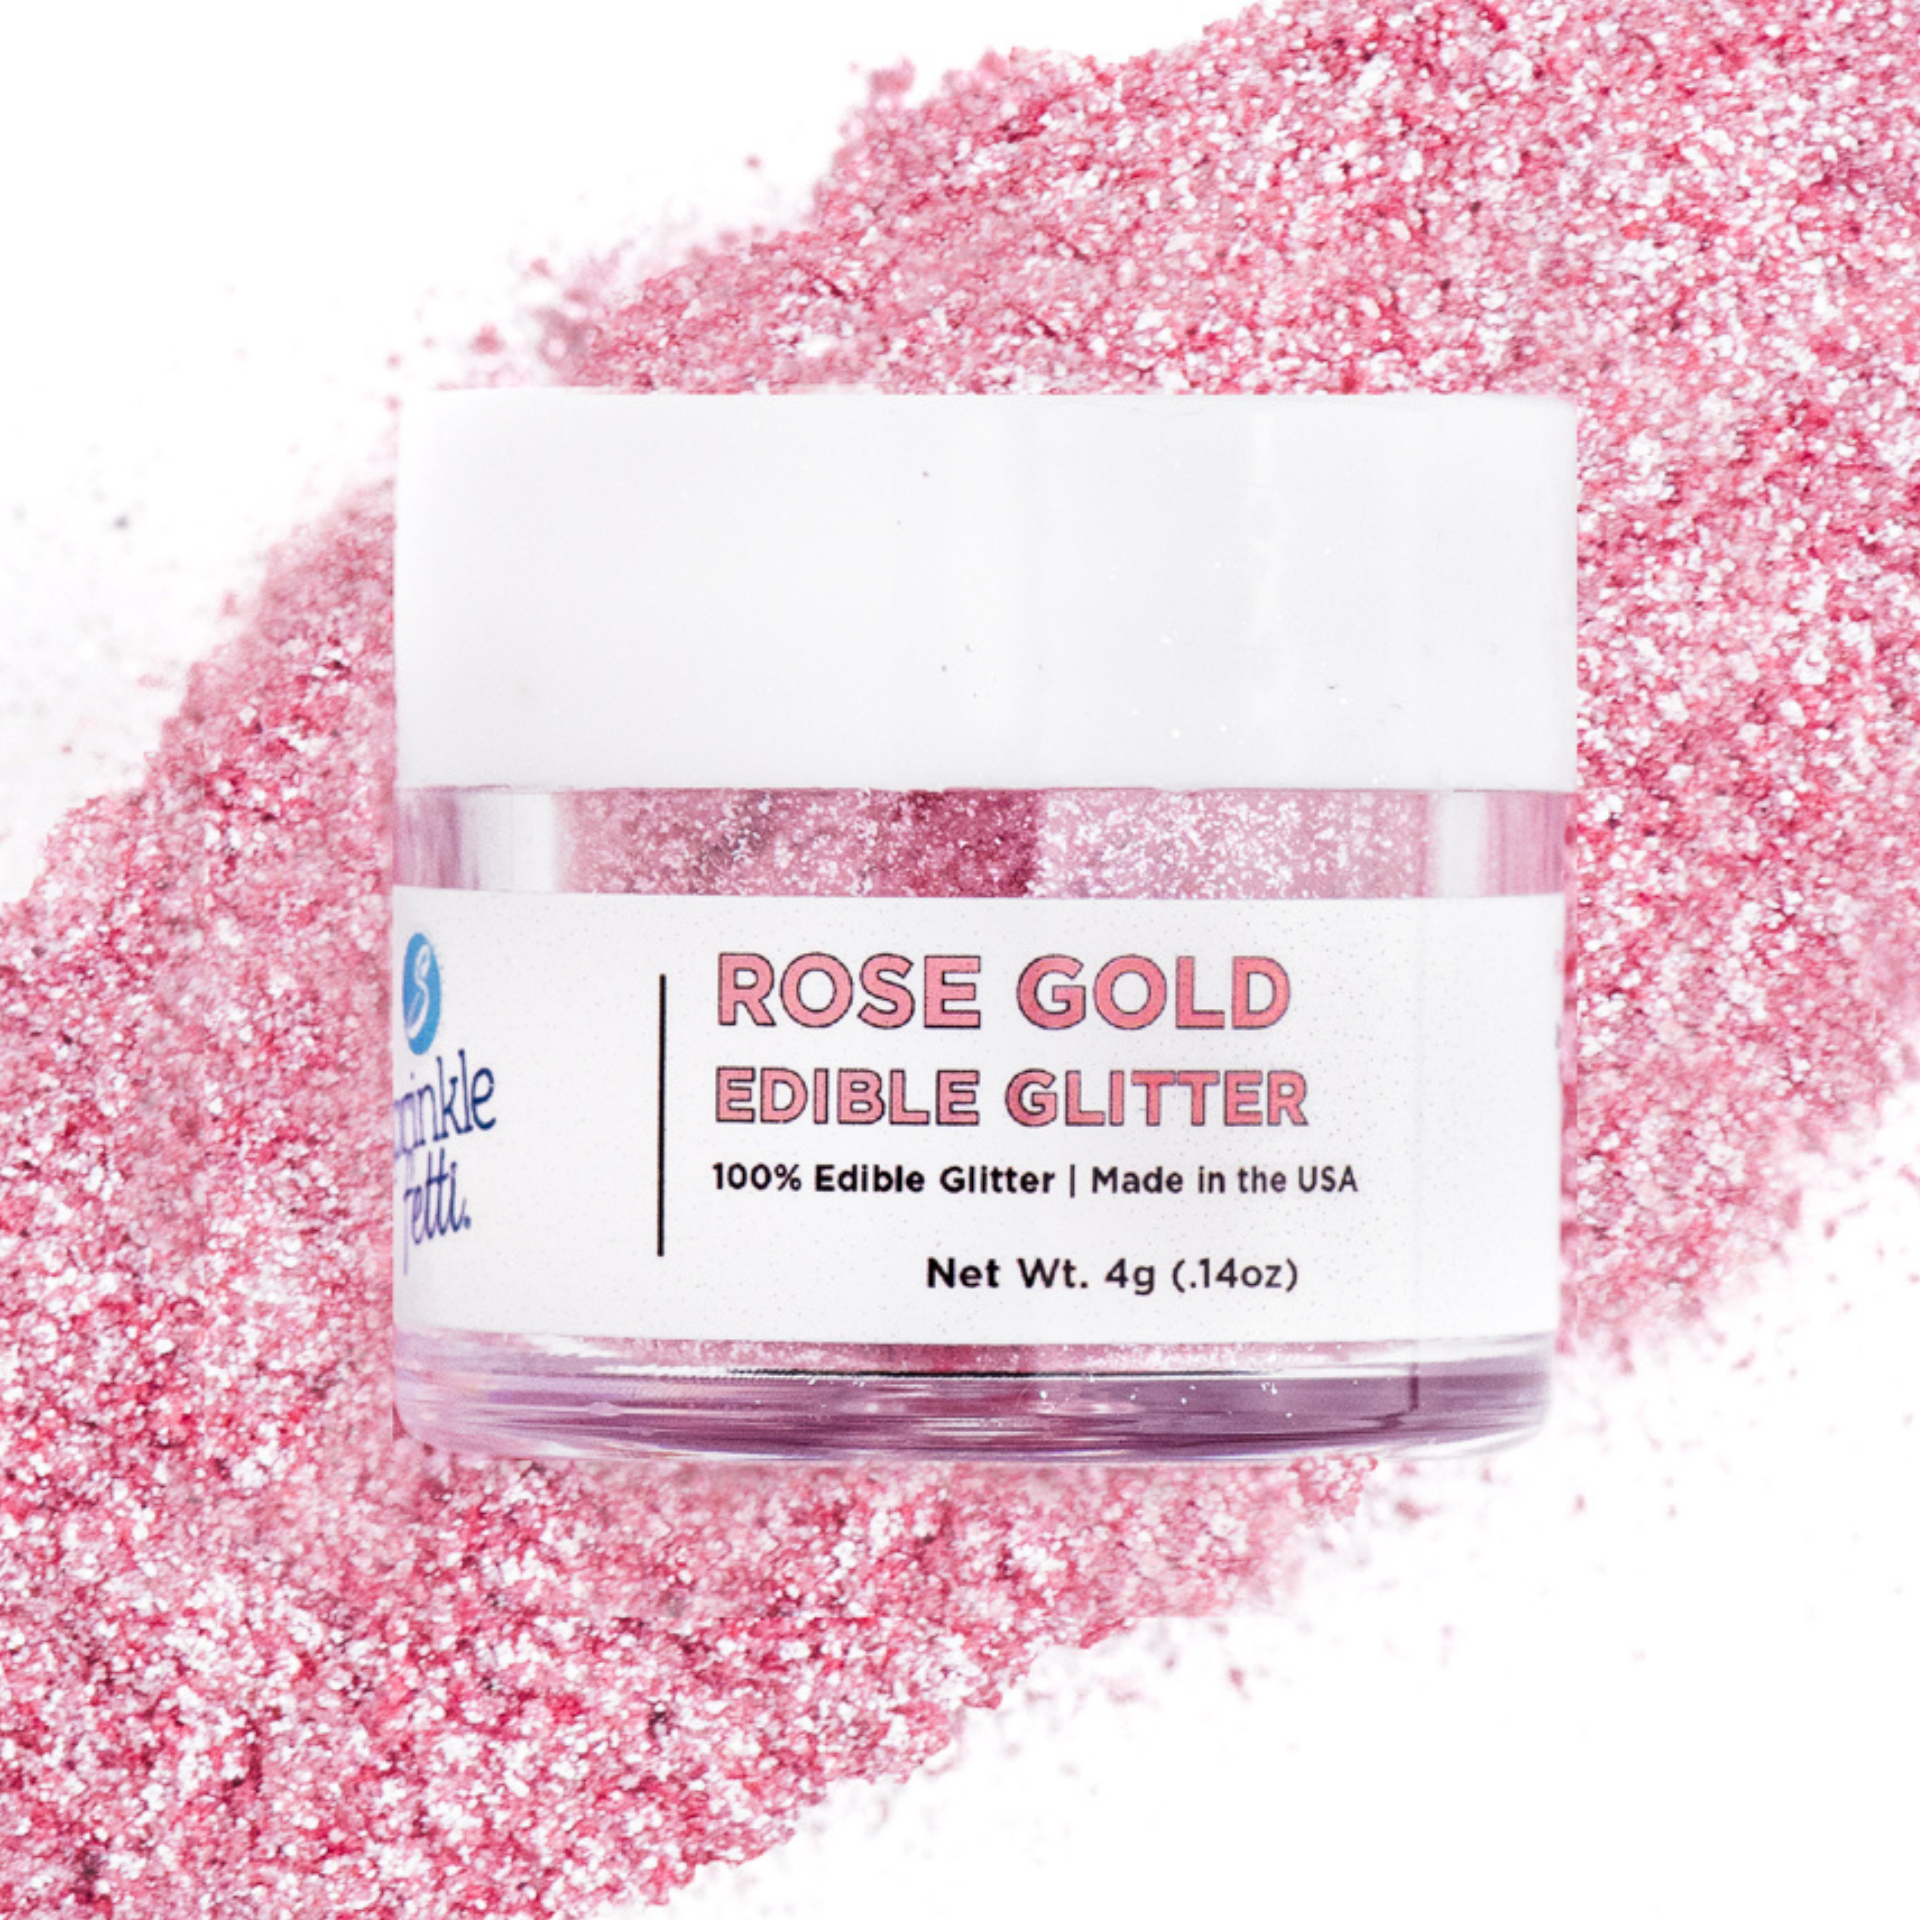 Sweets Indeed - Rose Gold Edible Glitter - Edible Glitter for Drinks, Food & Cake Decorating - Glitter Cake Topper for Desserts - Sprinklefetti - 4 G